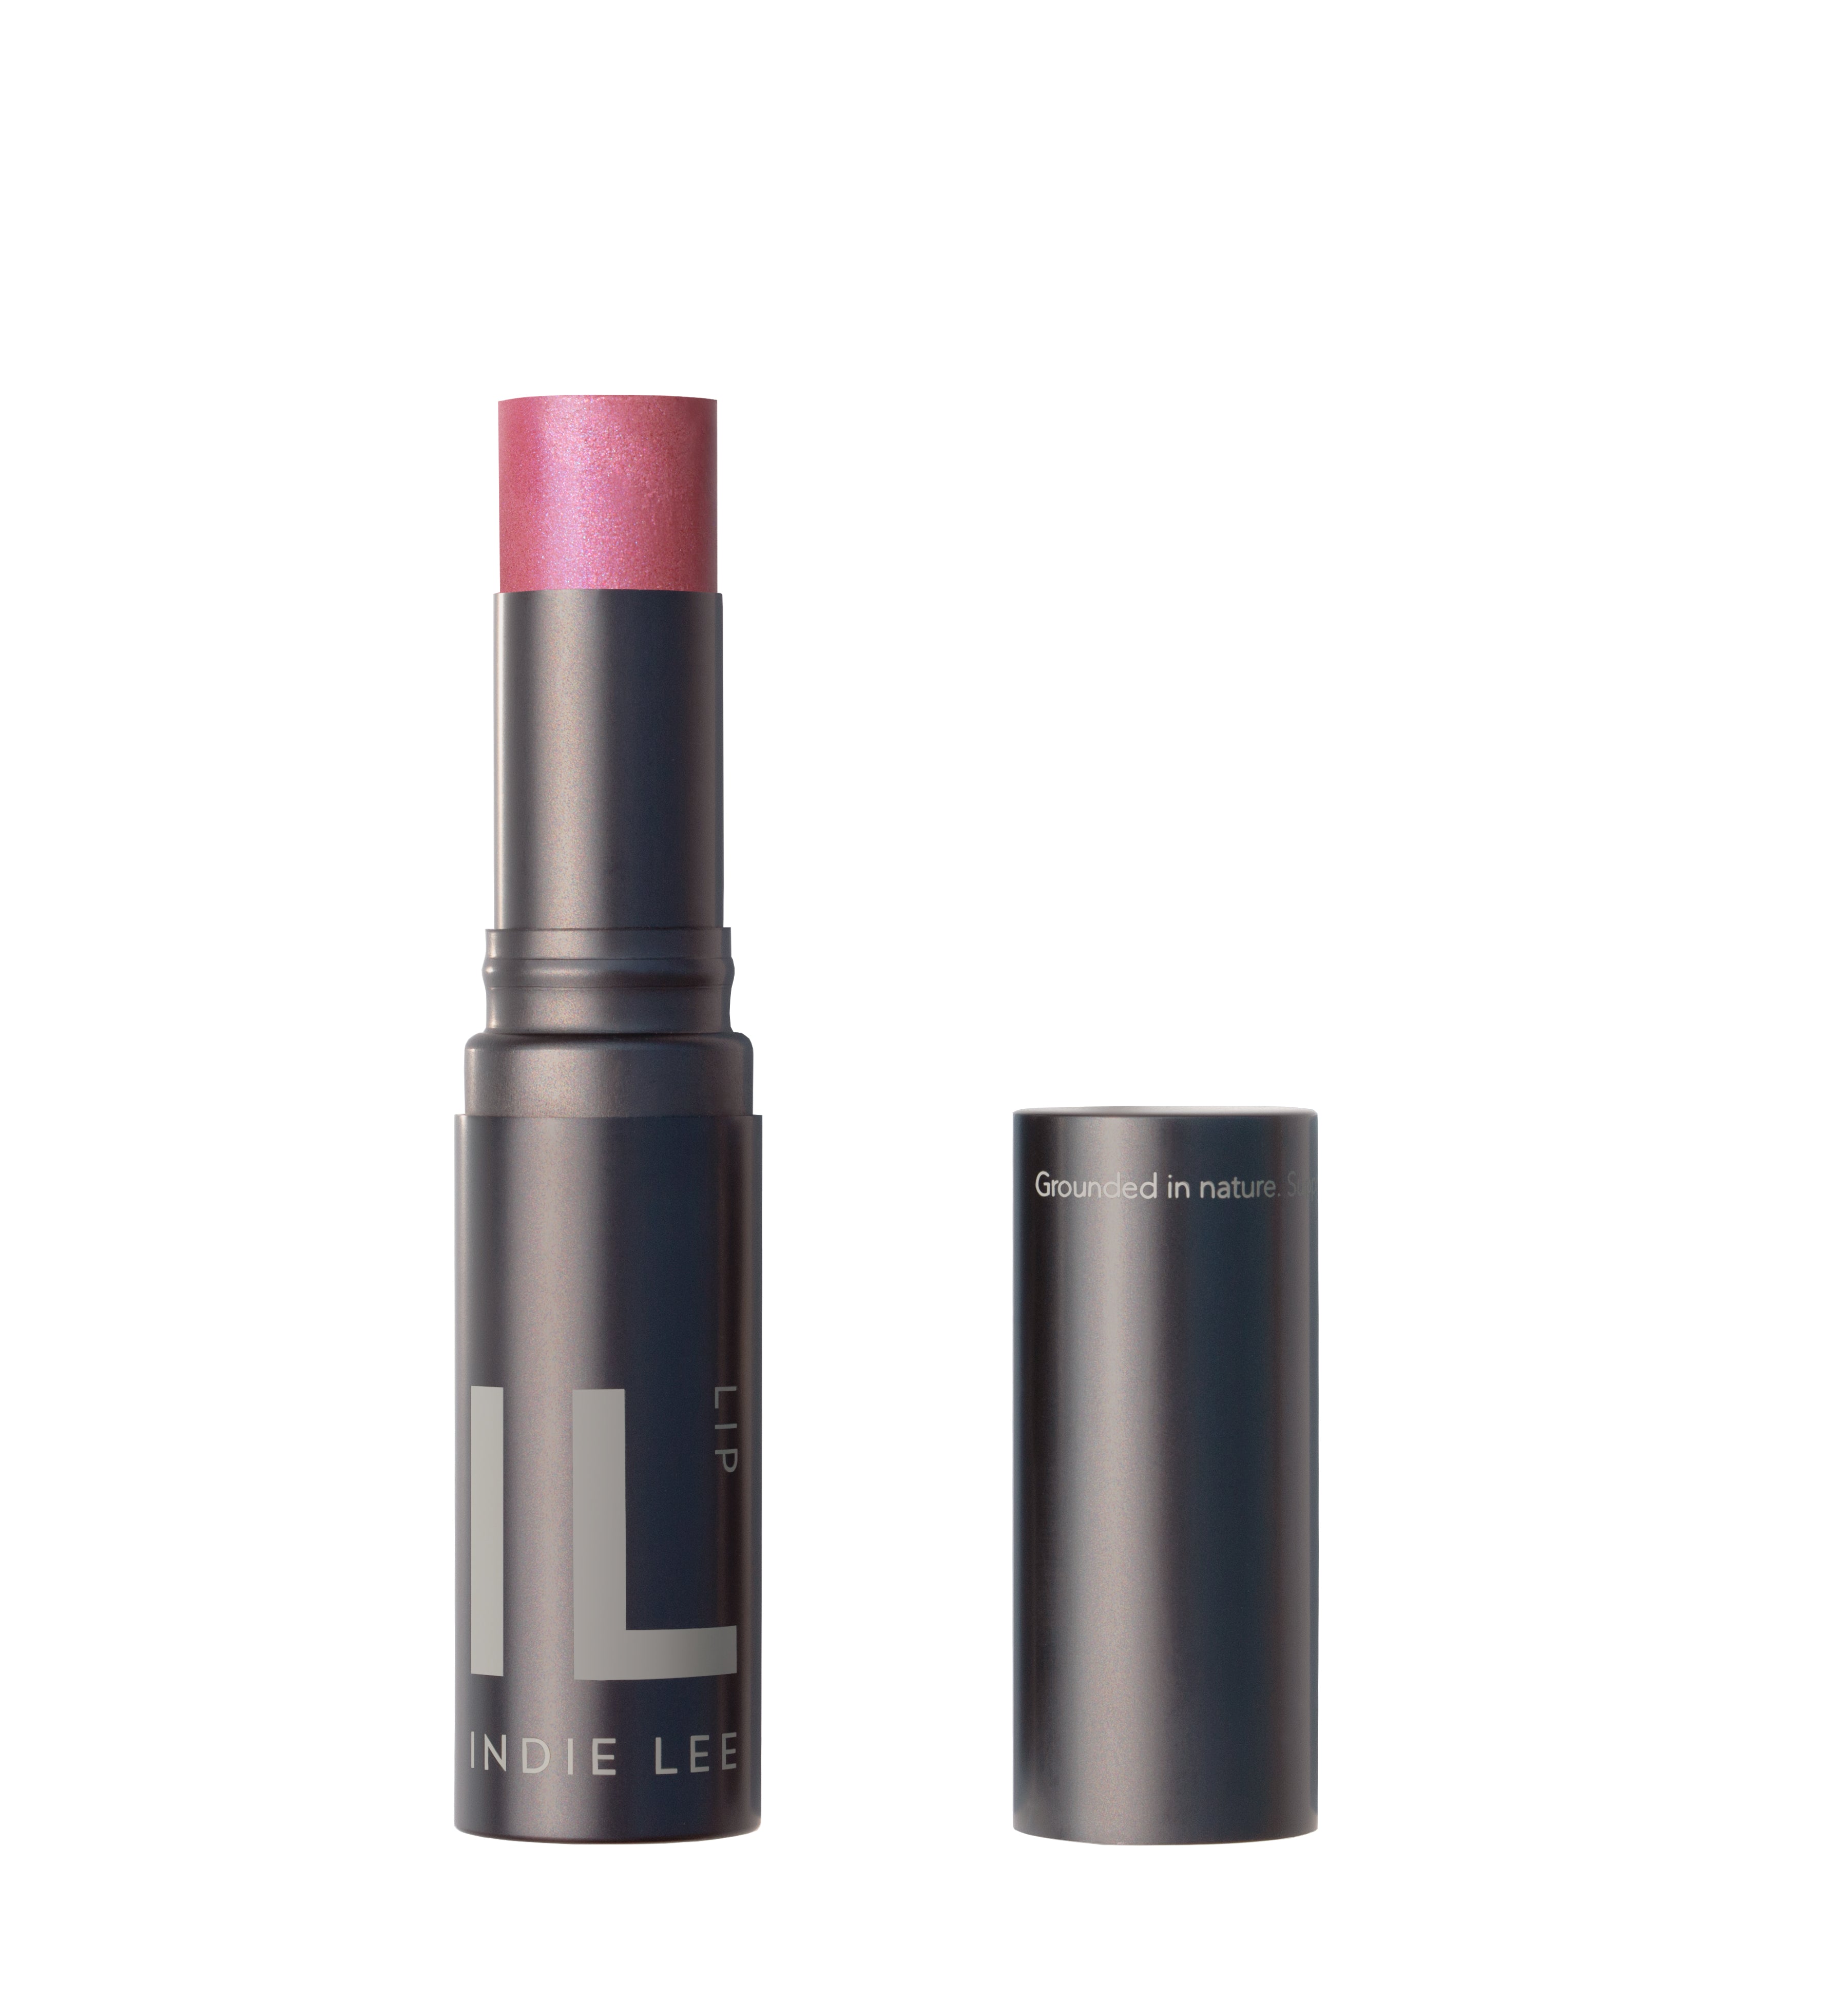 Nourishing Lip Tints "Play" by Indie Lee available online in Canada at Socialite Beauty.